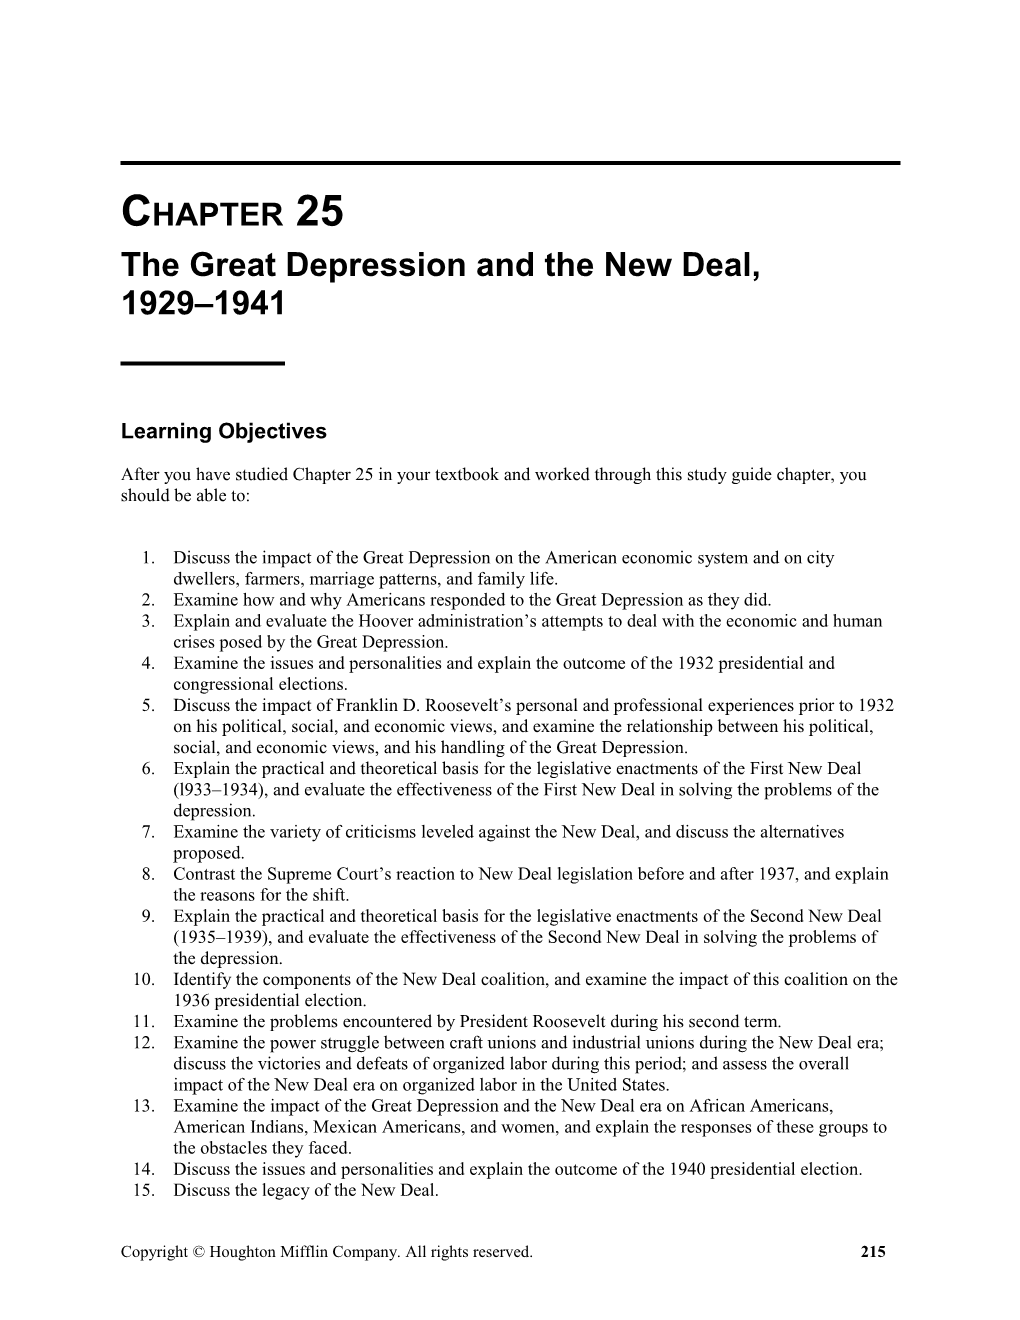 The Great Depression and the New Deal, 1929 19411